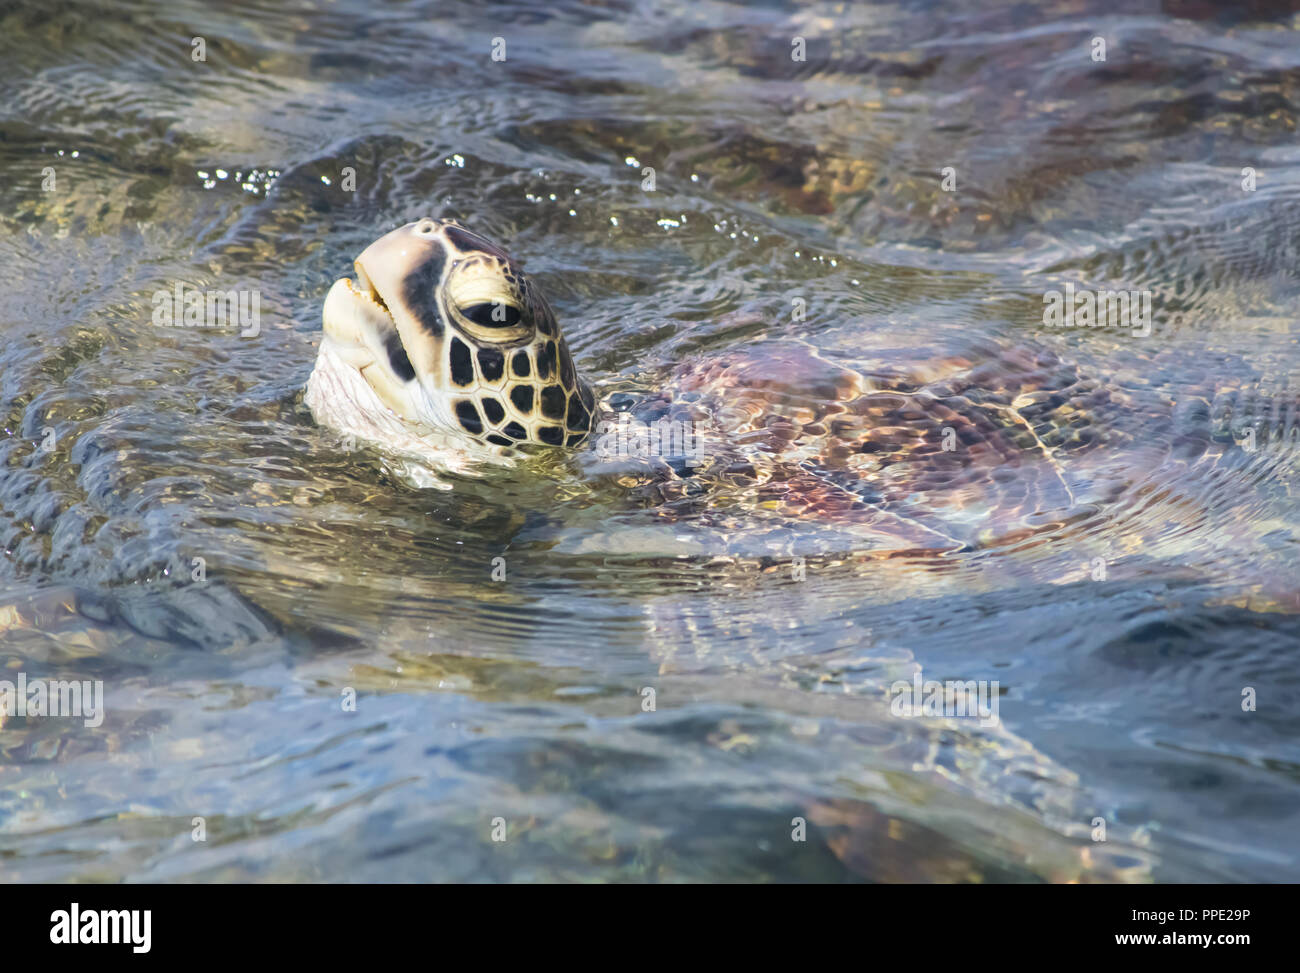 An adorable baby green sea turtle takes a break from foraging algae in the warm and shallow waters off Napili Beach on the island of Maui. Stock Photo